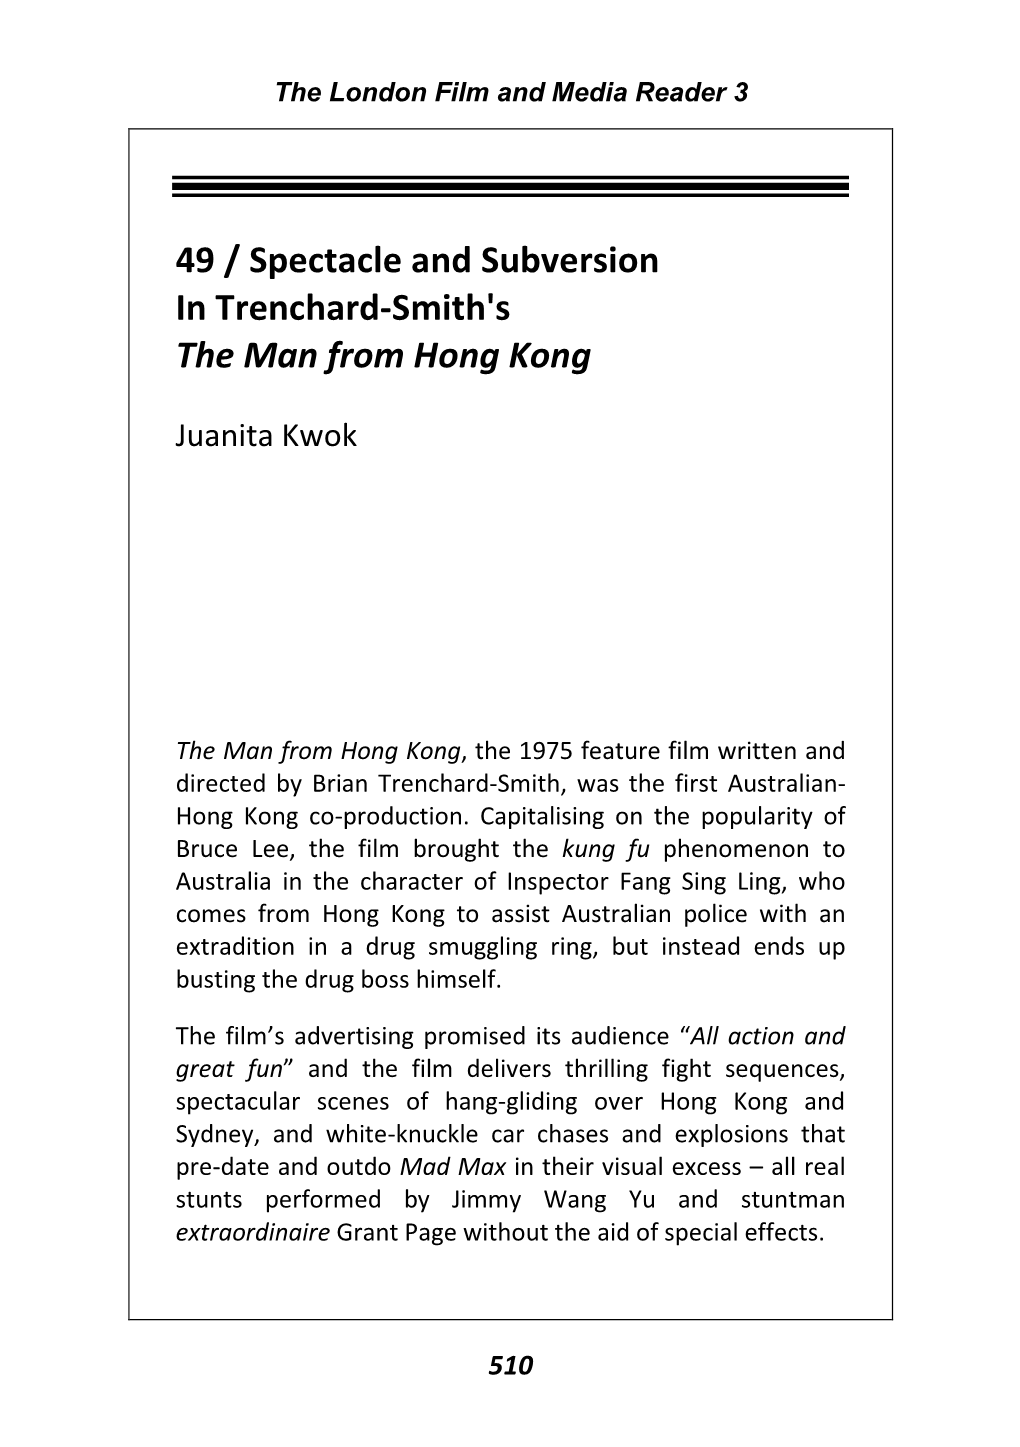 49 / Spectacle and Subversion in Trenchard-Smith's the Man from Hong Kong